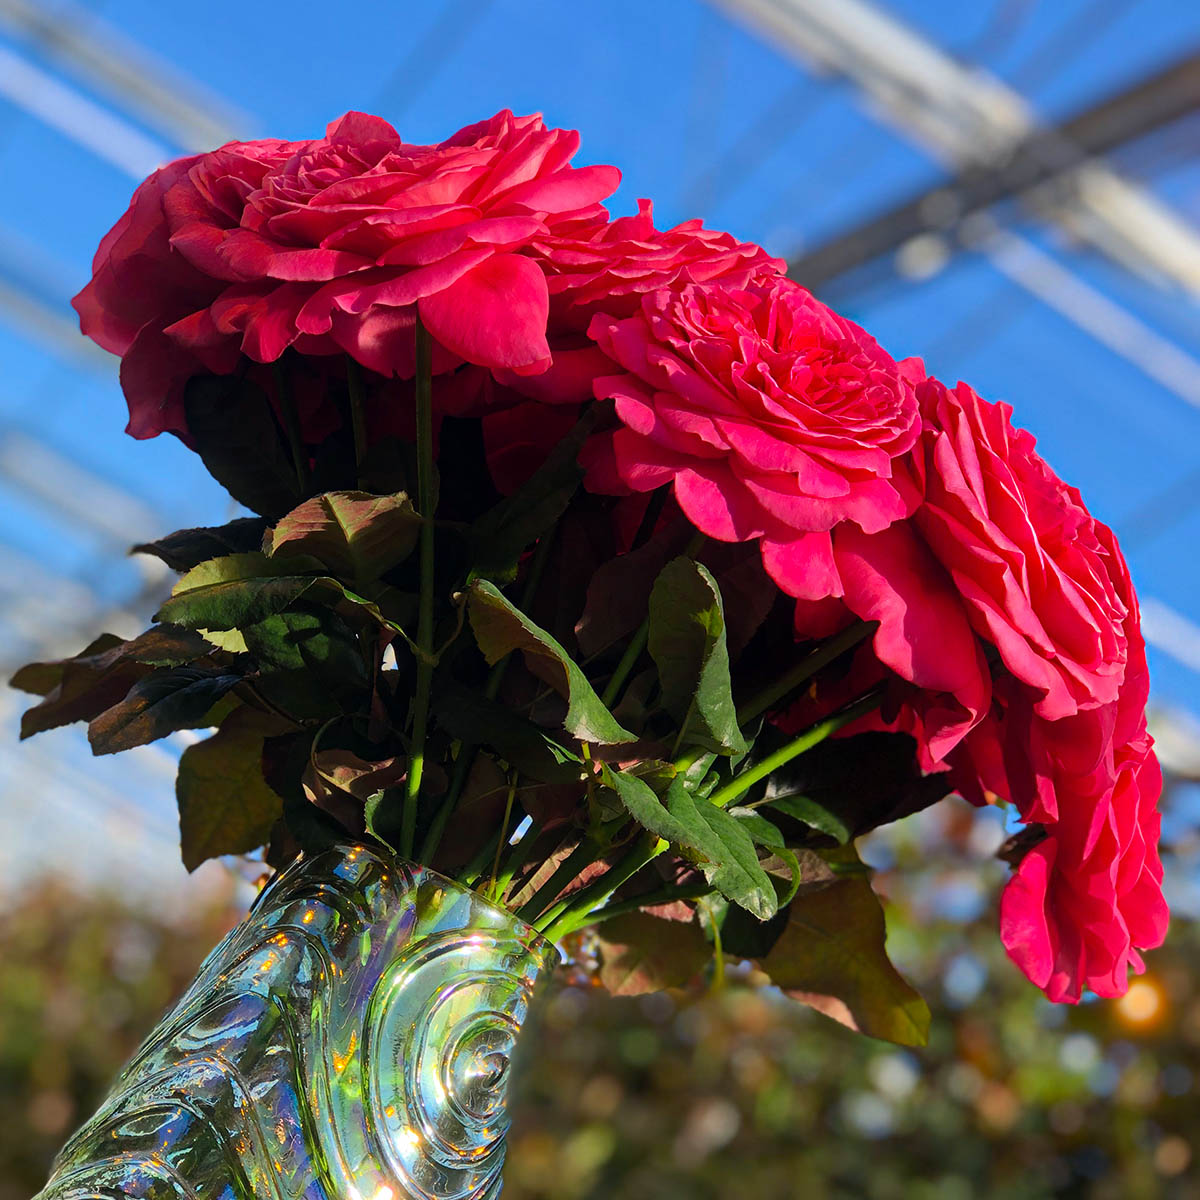 growing-cold-greenhouse-roses-and-saving-energy-its-possible-featured